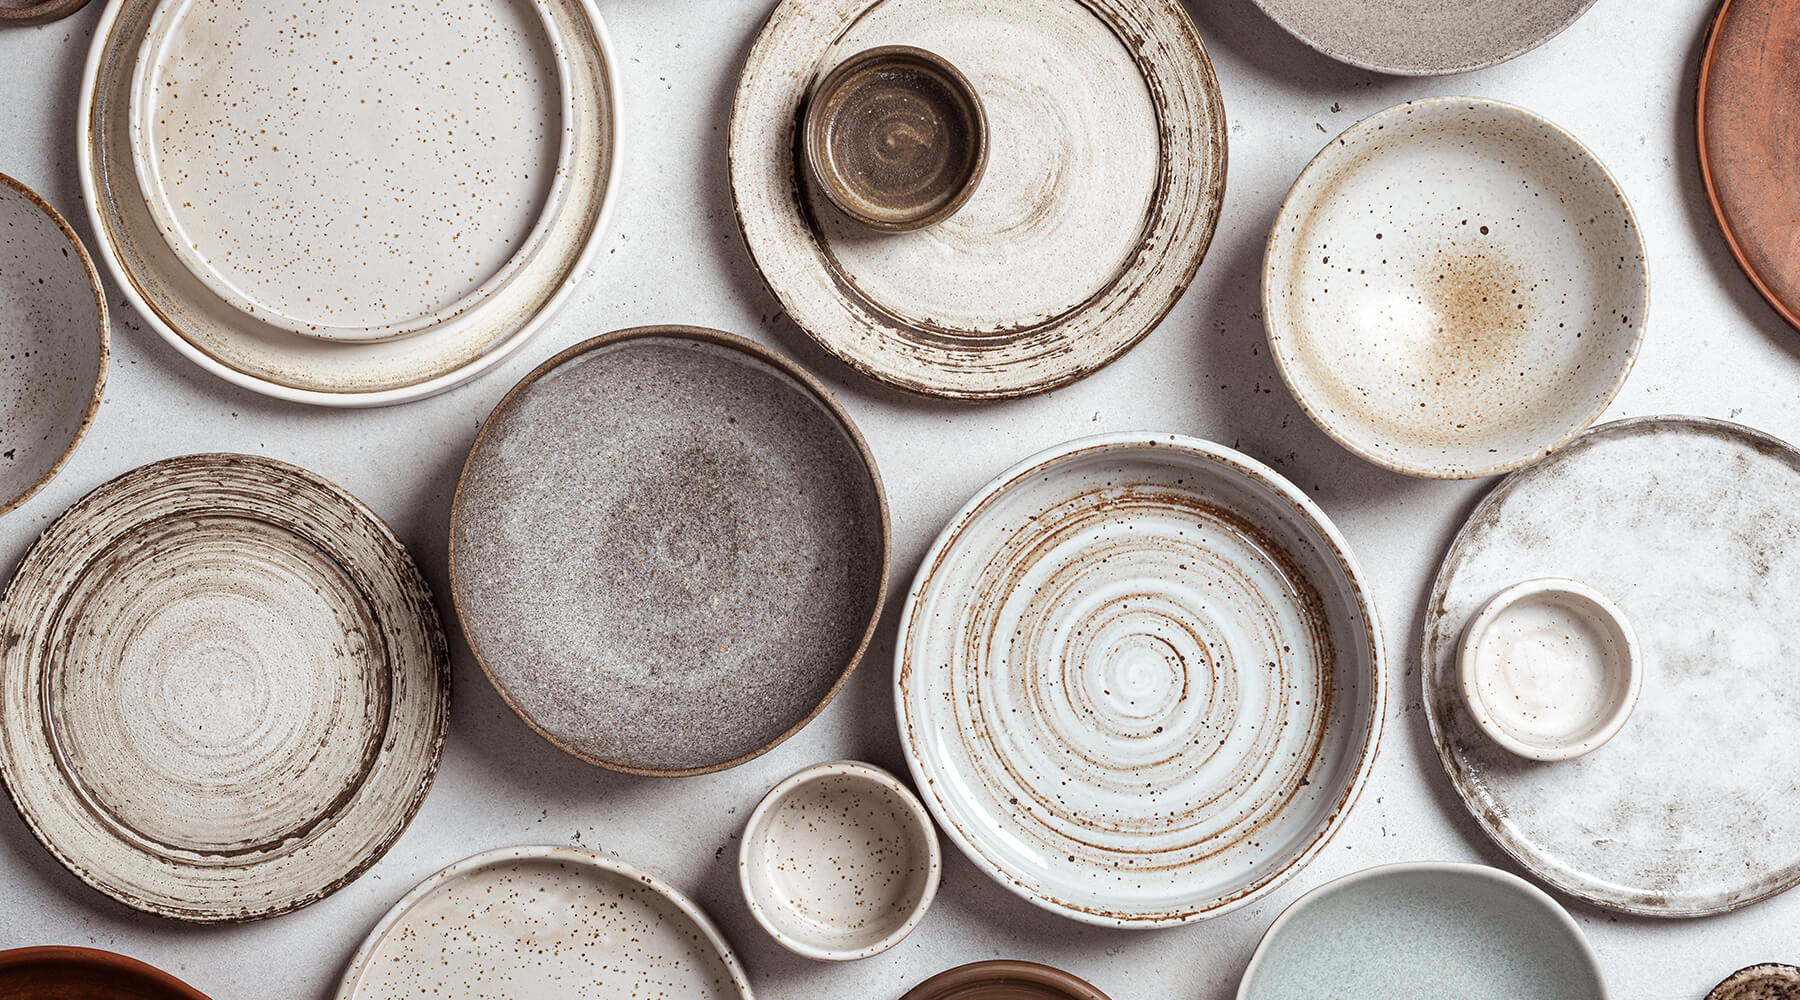 Why Stoneware Is It the Perfect Choice for Everyday Use?